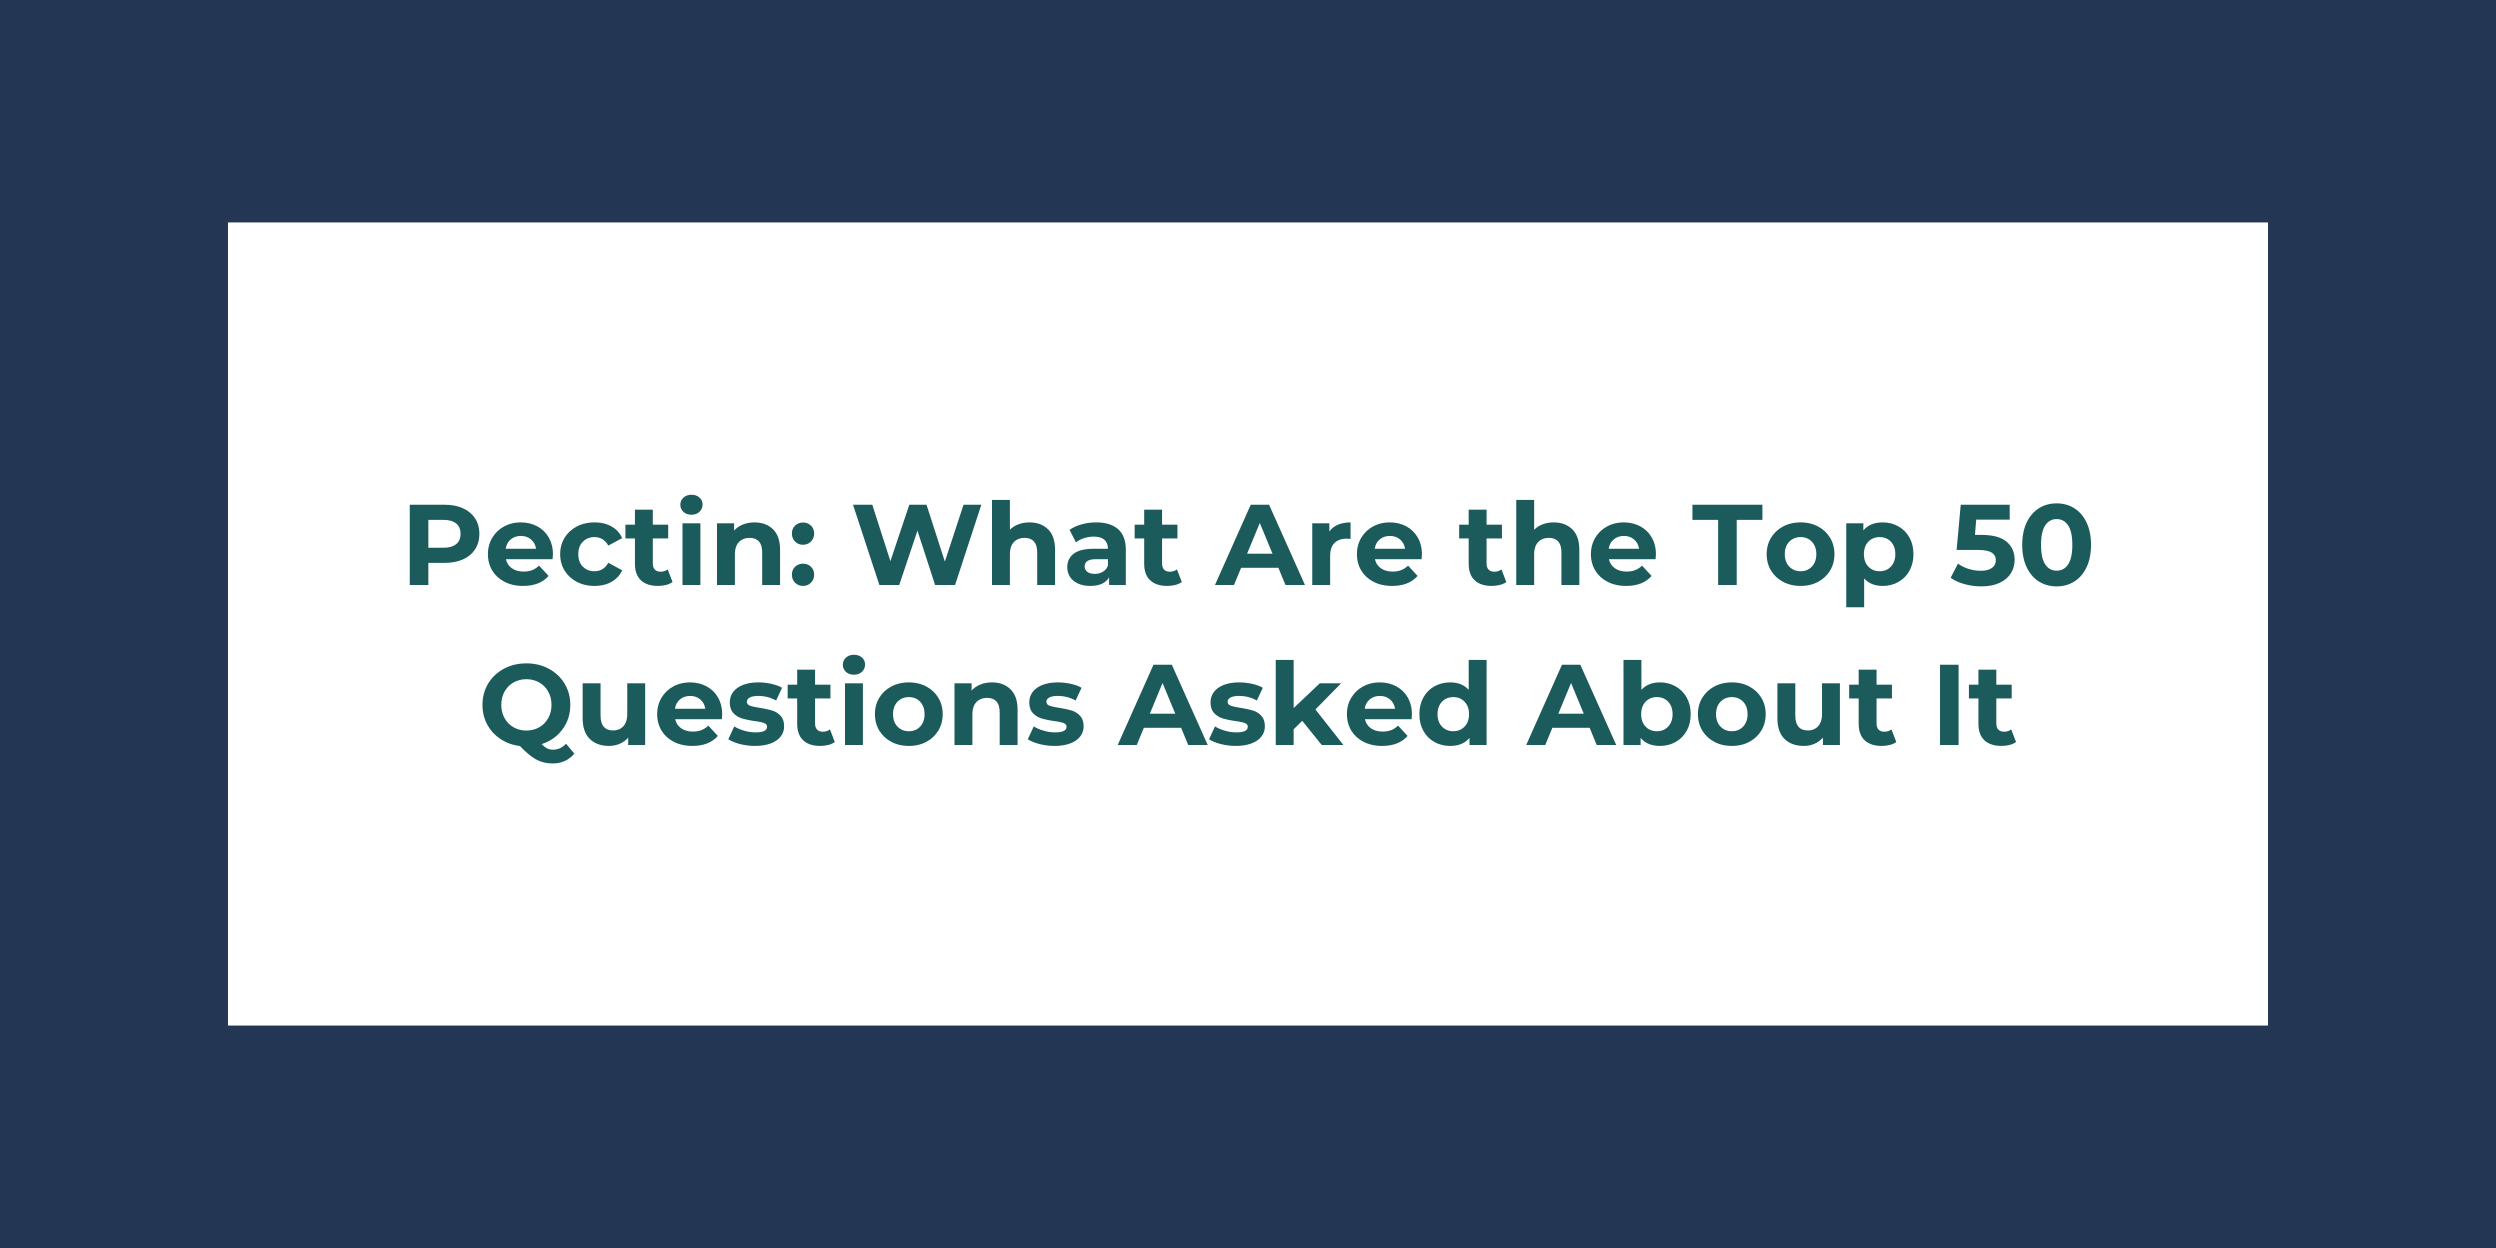 Pectin: What Are the Top 50 Questions Asked About It